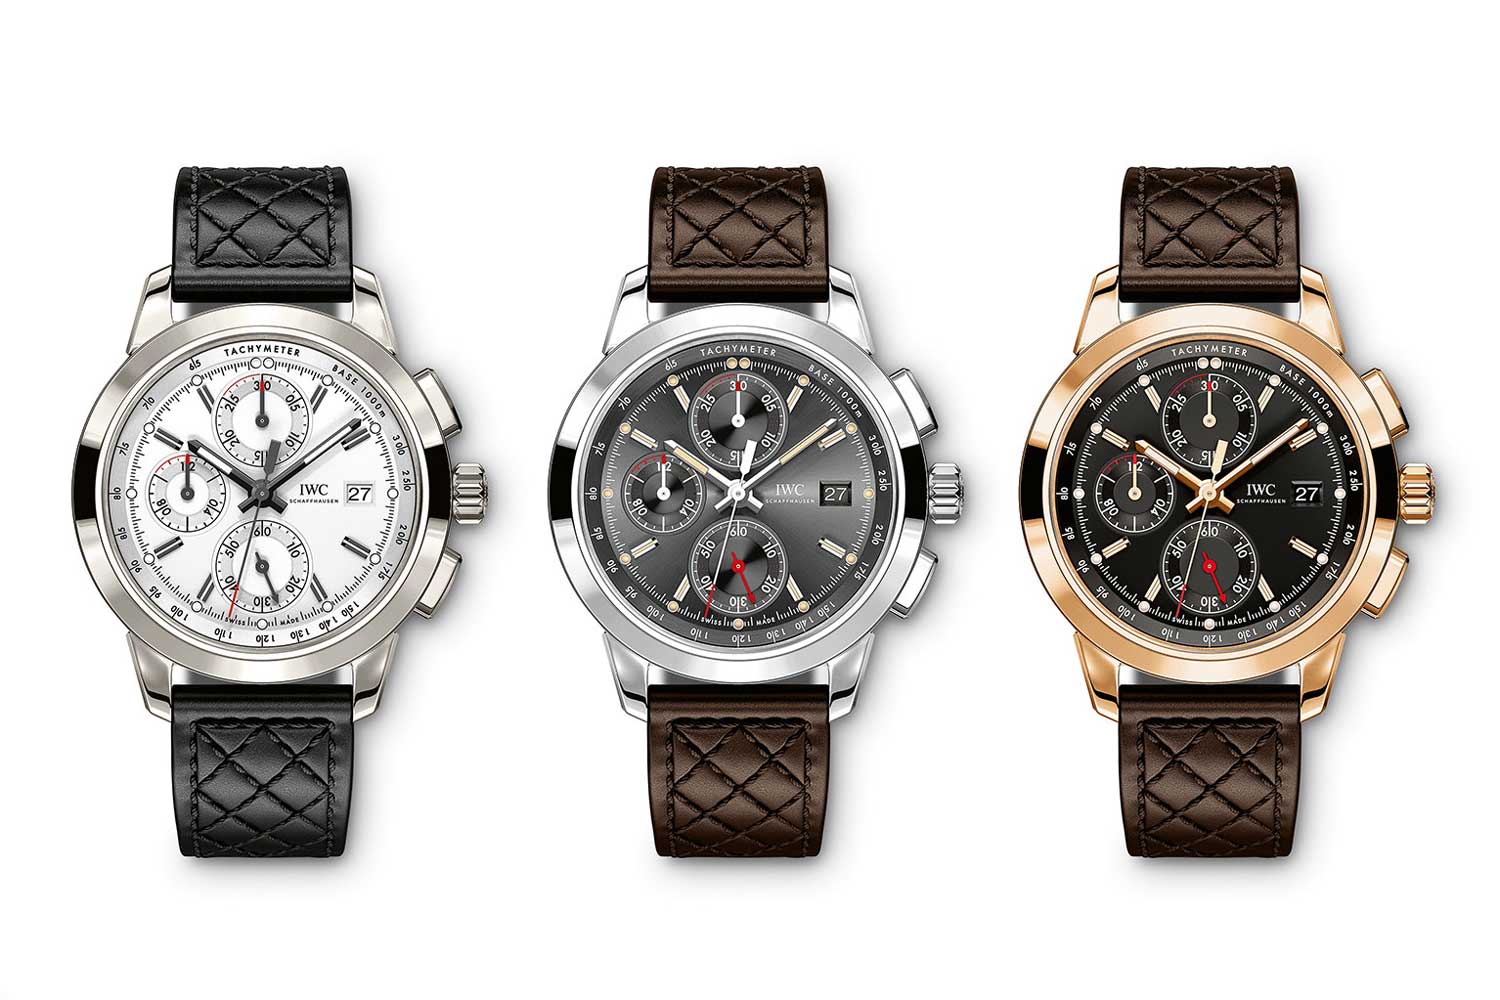 IWC introduced the restyled Ingenieur Chronograph in 2016 in three versions powered by its in-house calibre 69370